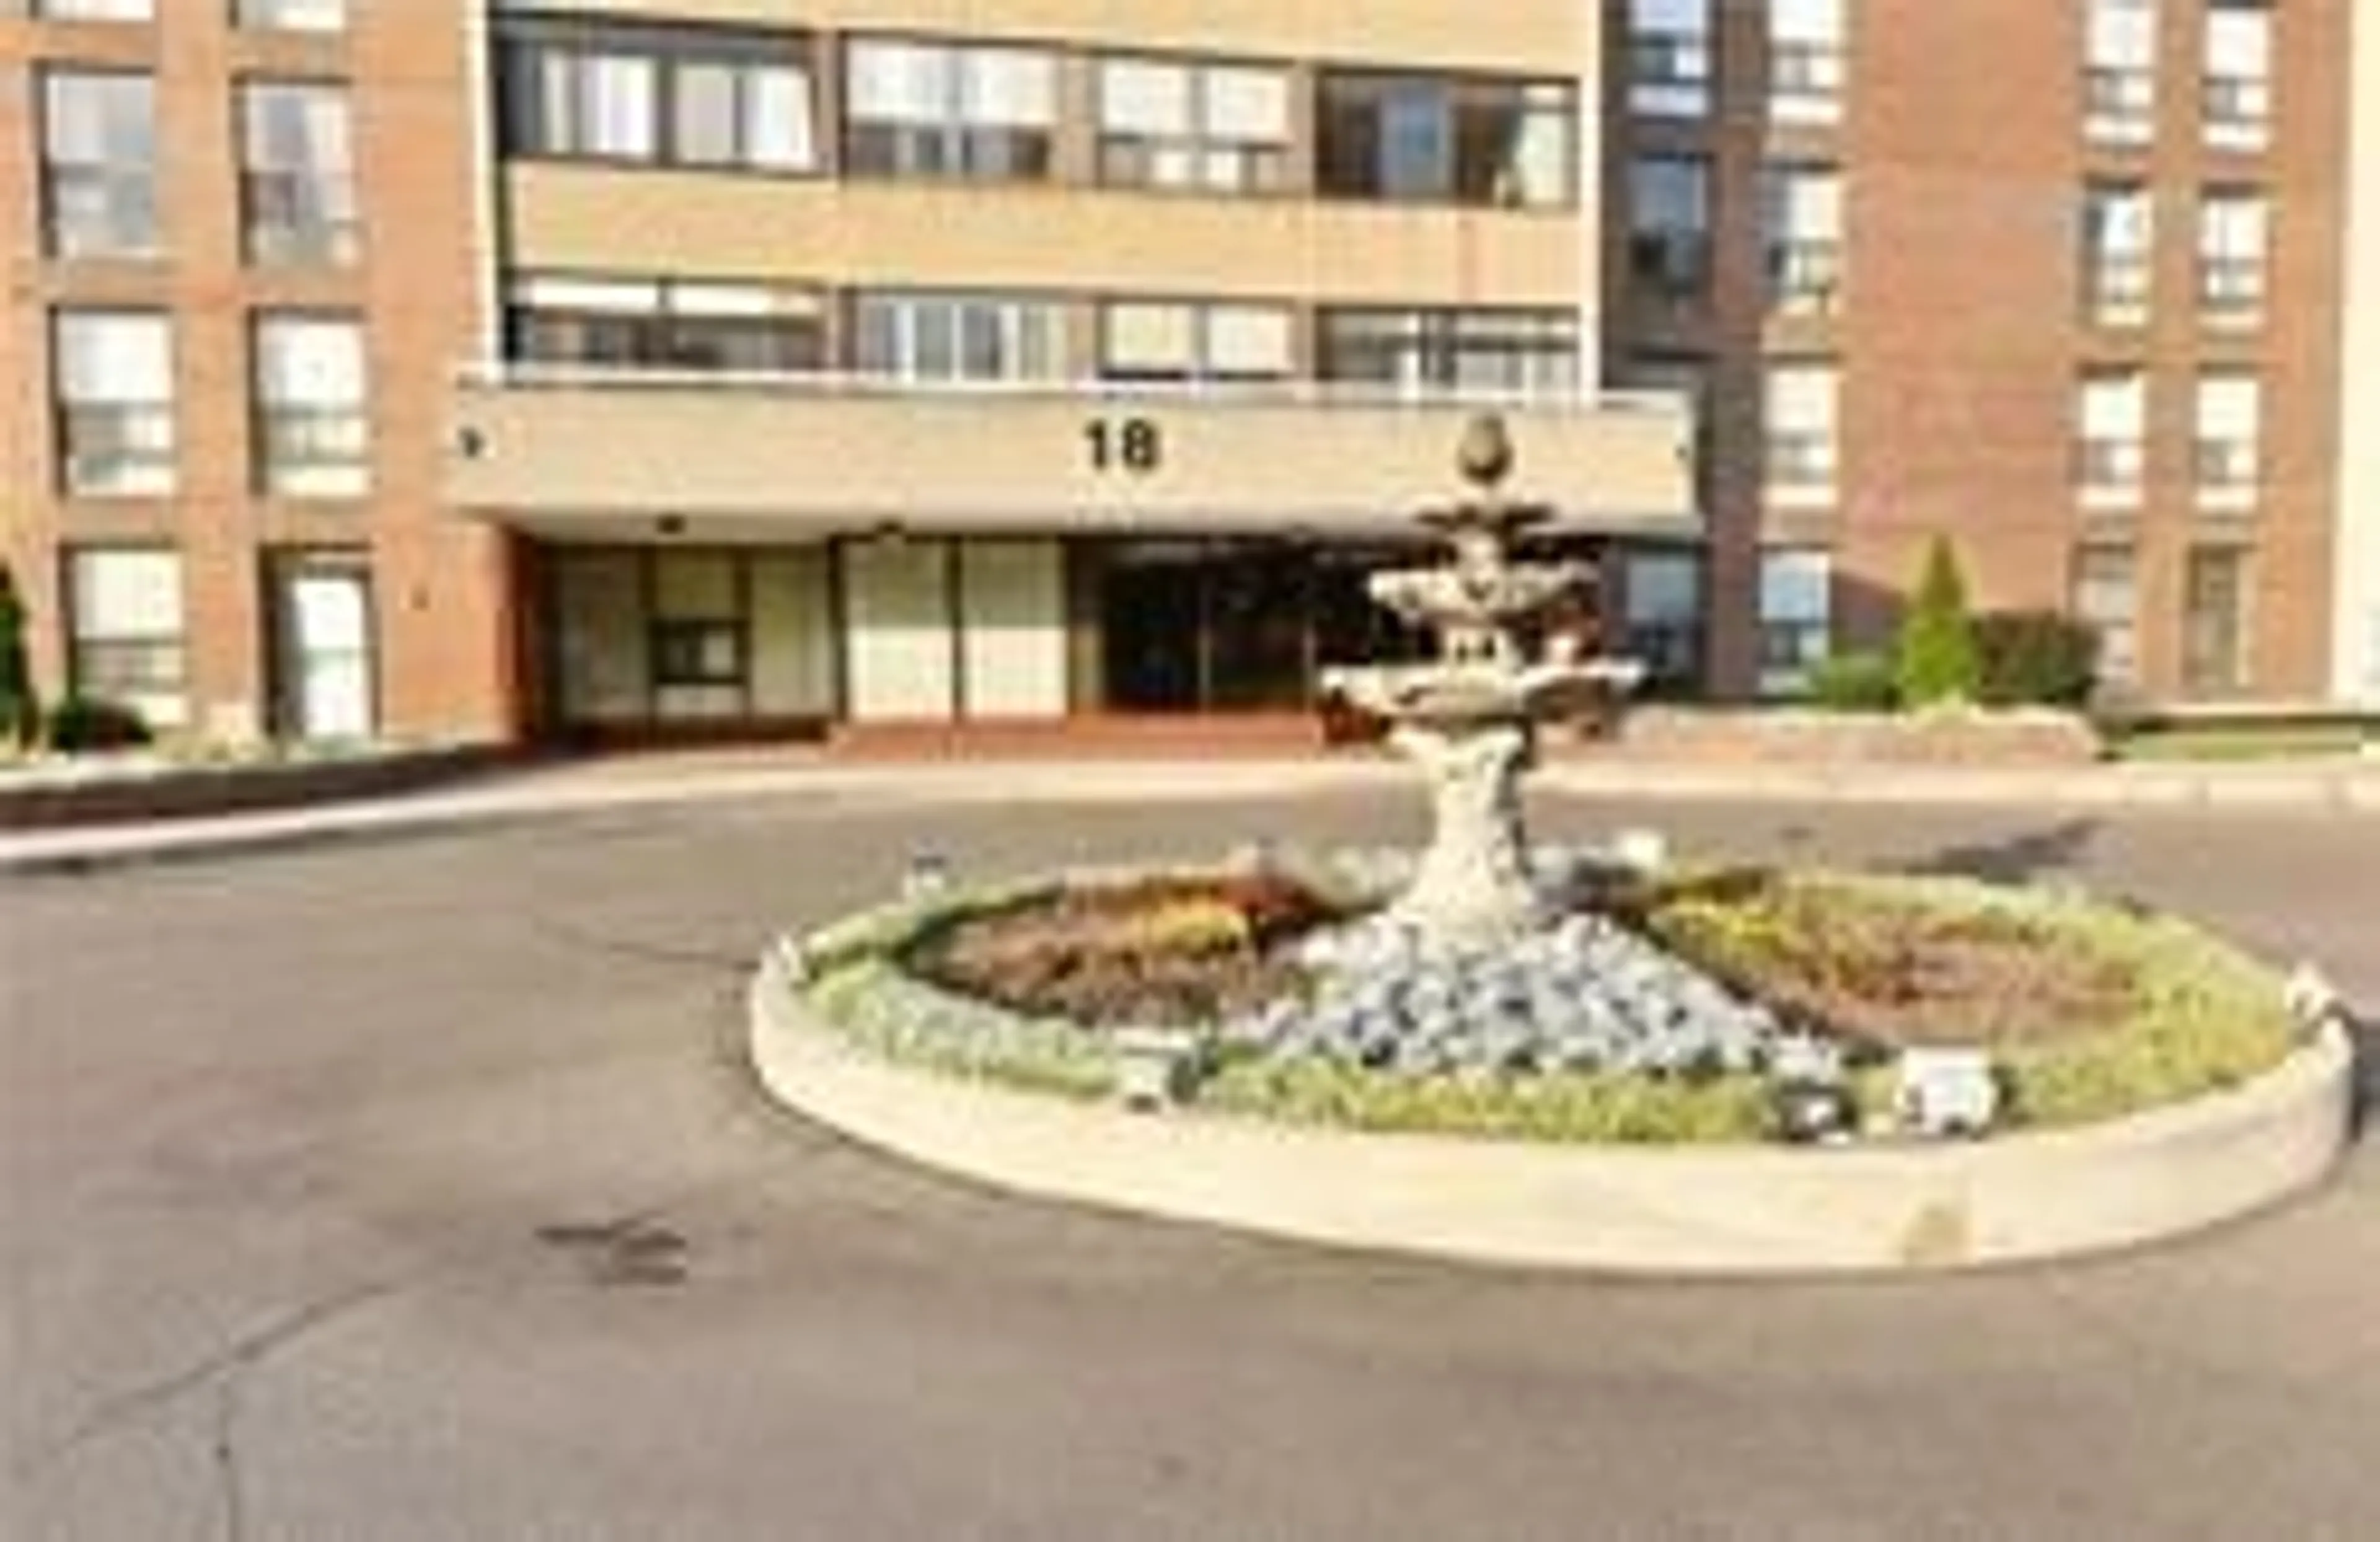 A pic from exterior of the house or condo for 18 Knightsbridge Rd #1611, Brampton Ontario L6T 3X5